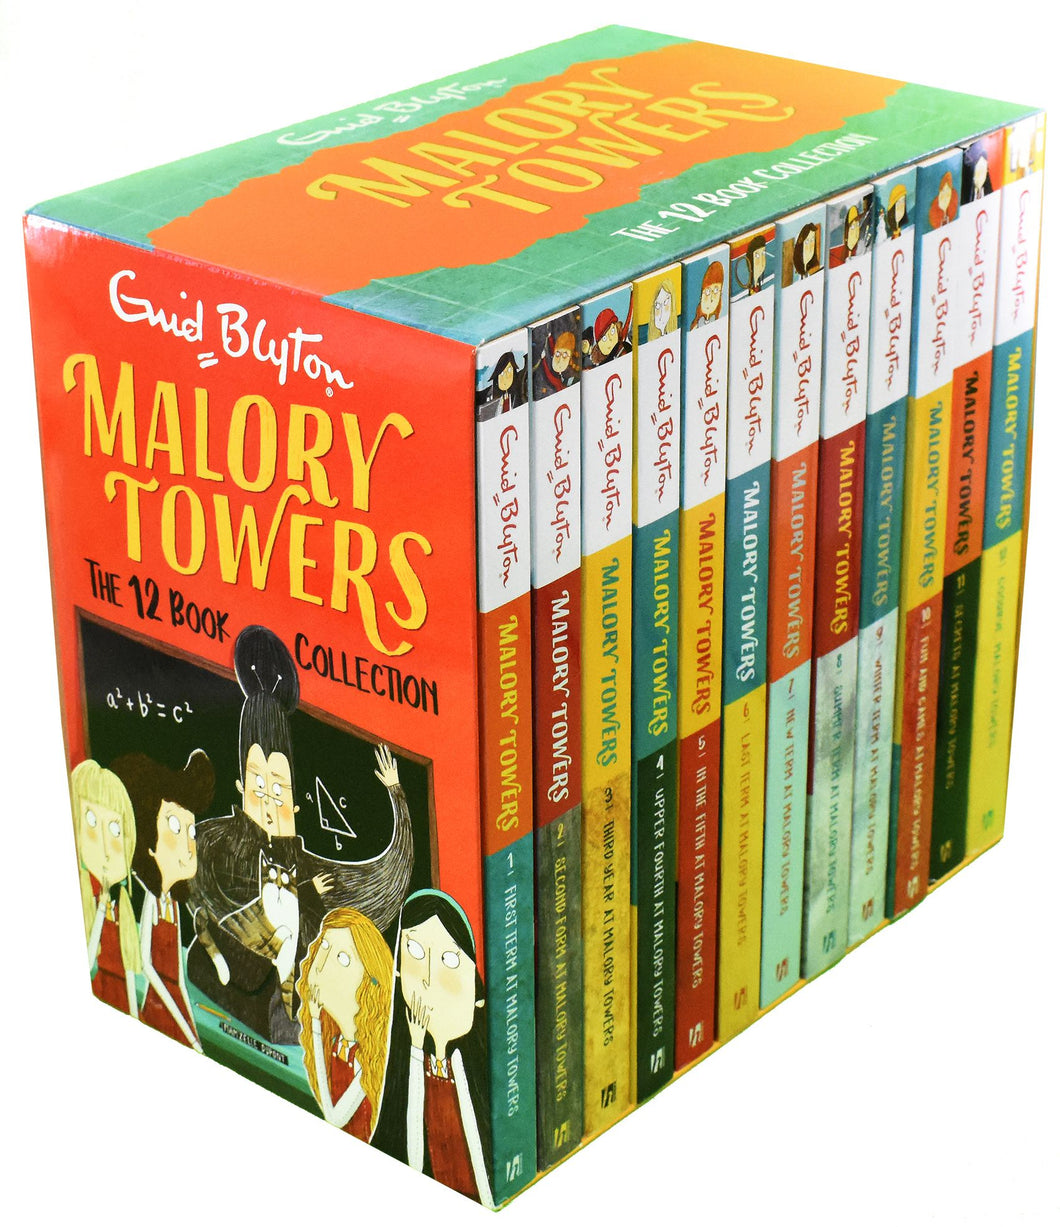 Malory Towers 12 Books Children Collection Box Set By Enid Blyton 